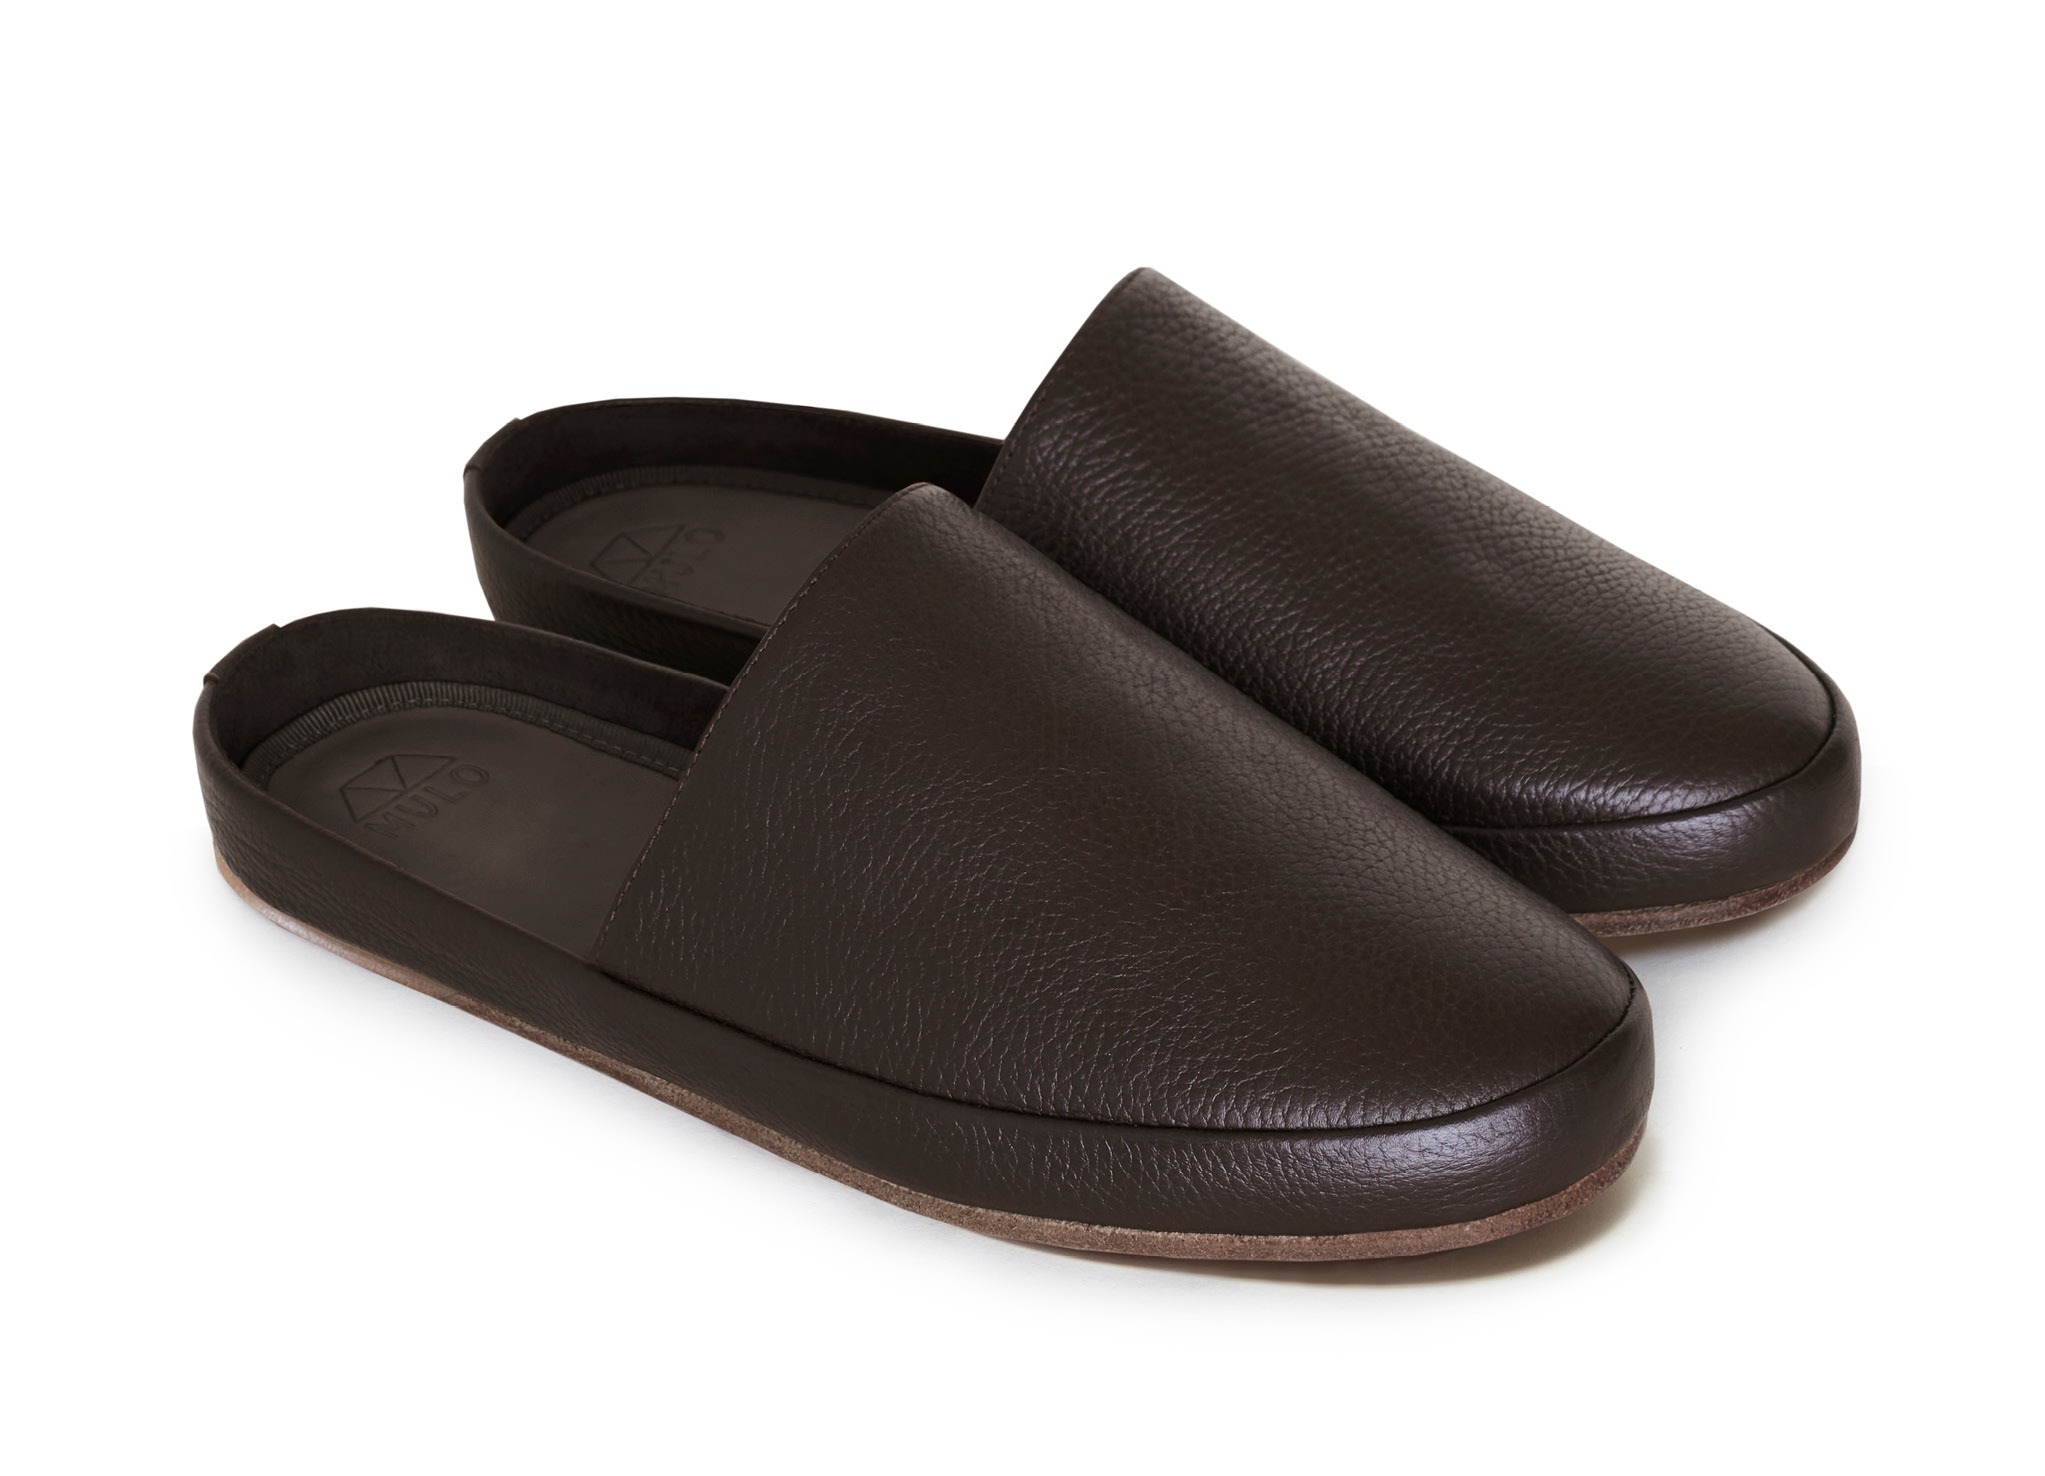 https://www.muloshoes.com/wp-content/uploads/Mens-Leather-Slippers-in-Brown.jpg